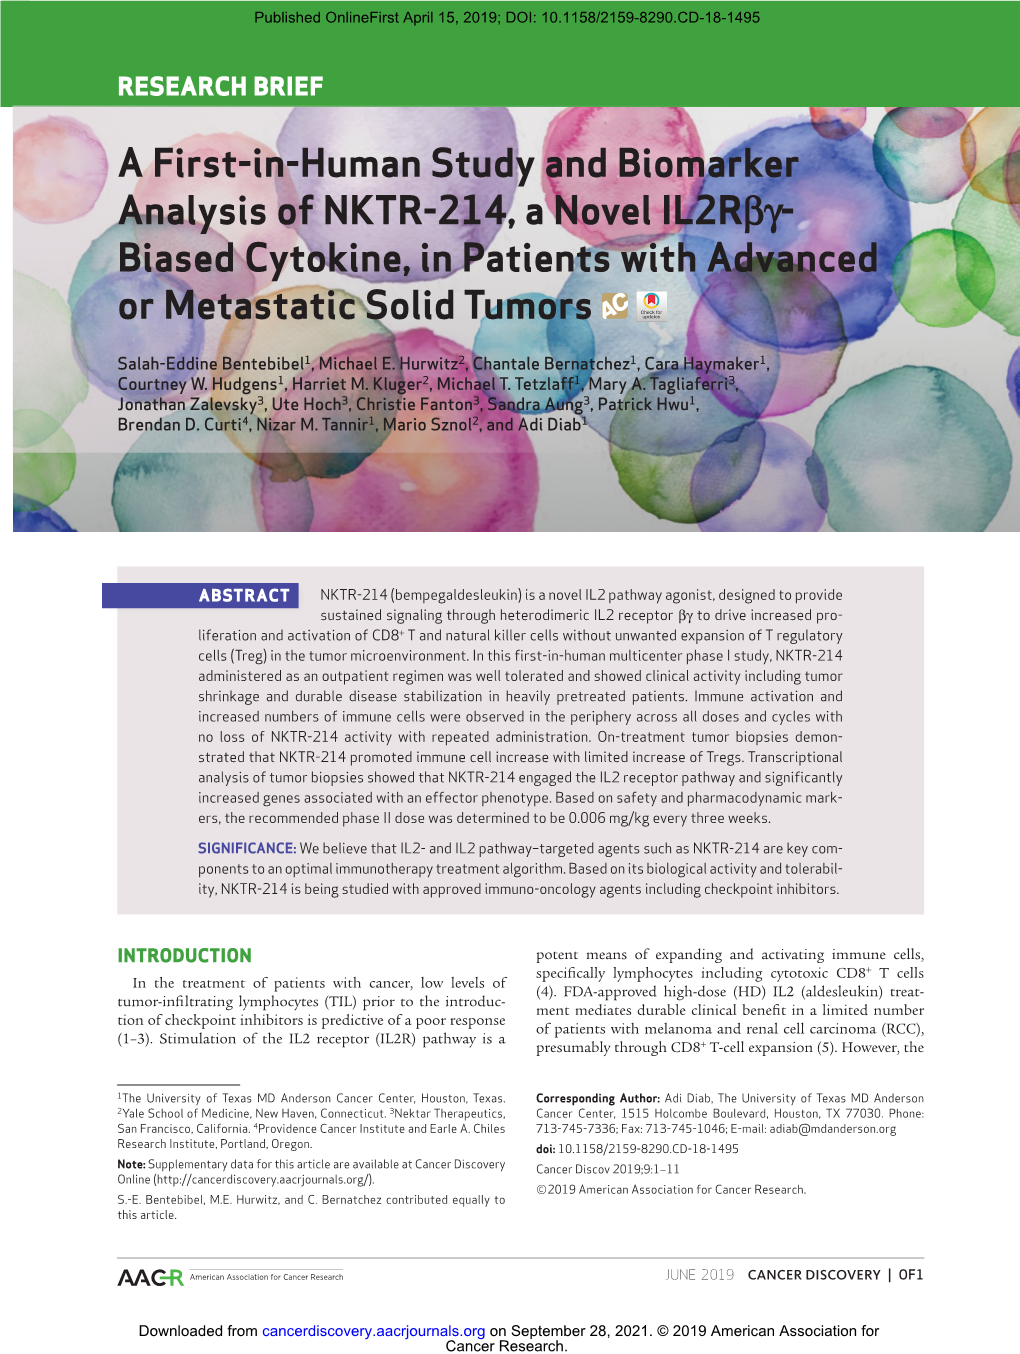 A First-In-Human Study and Biomarker Analysis of NKTR-214, a Novel Il2raf- Biased Cytokine, in Patients with Advanced Or Metastatic Solid Tumors